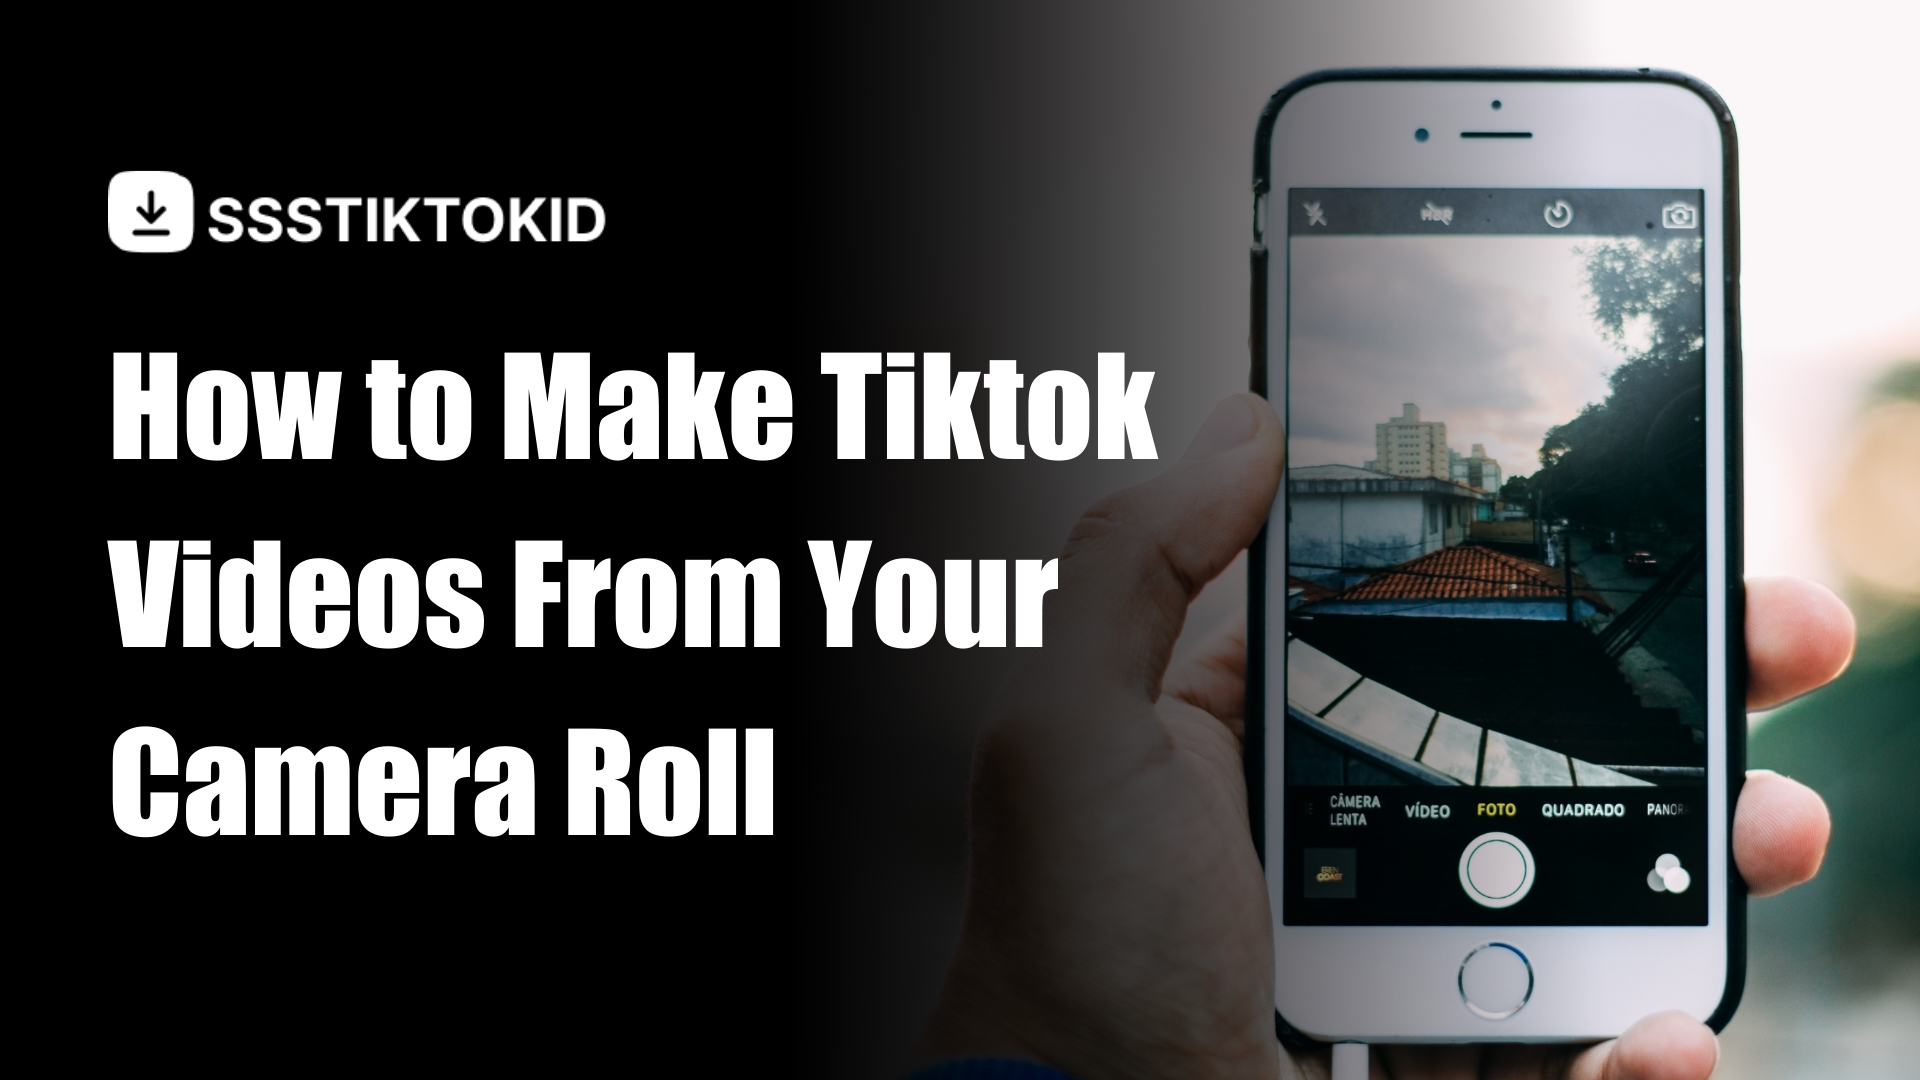 How to Make Tiktok Videos From Your Camera Roll